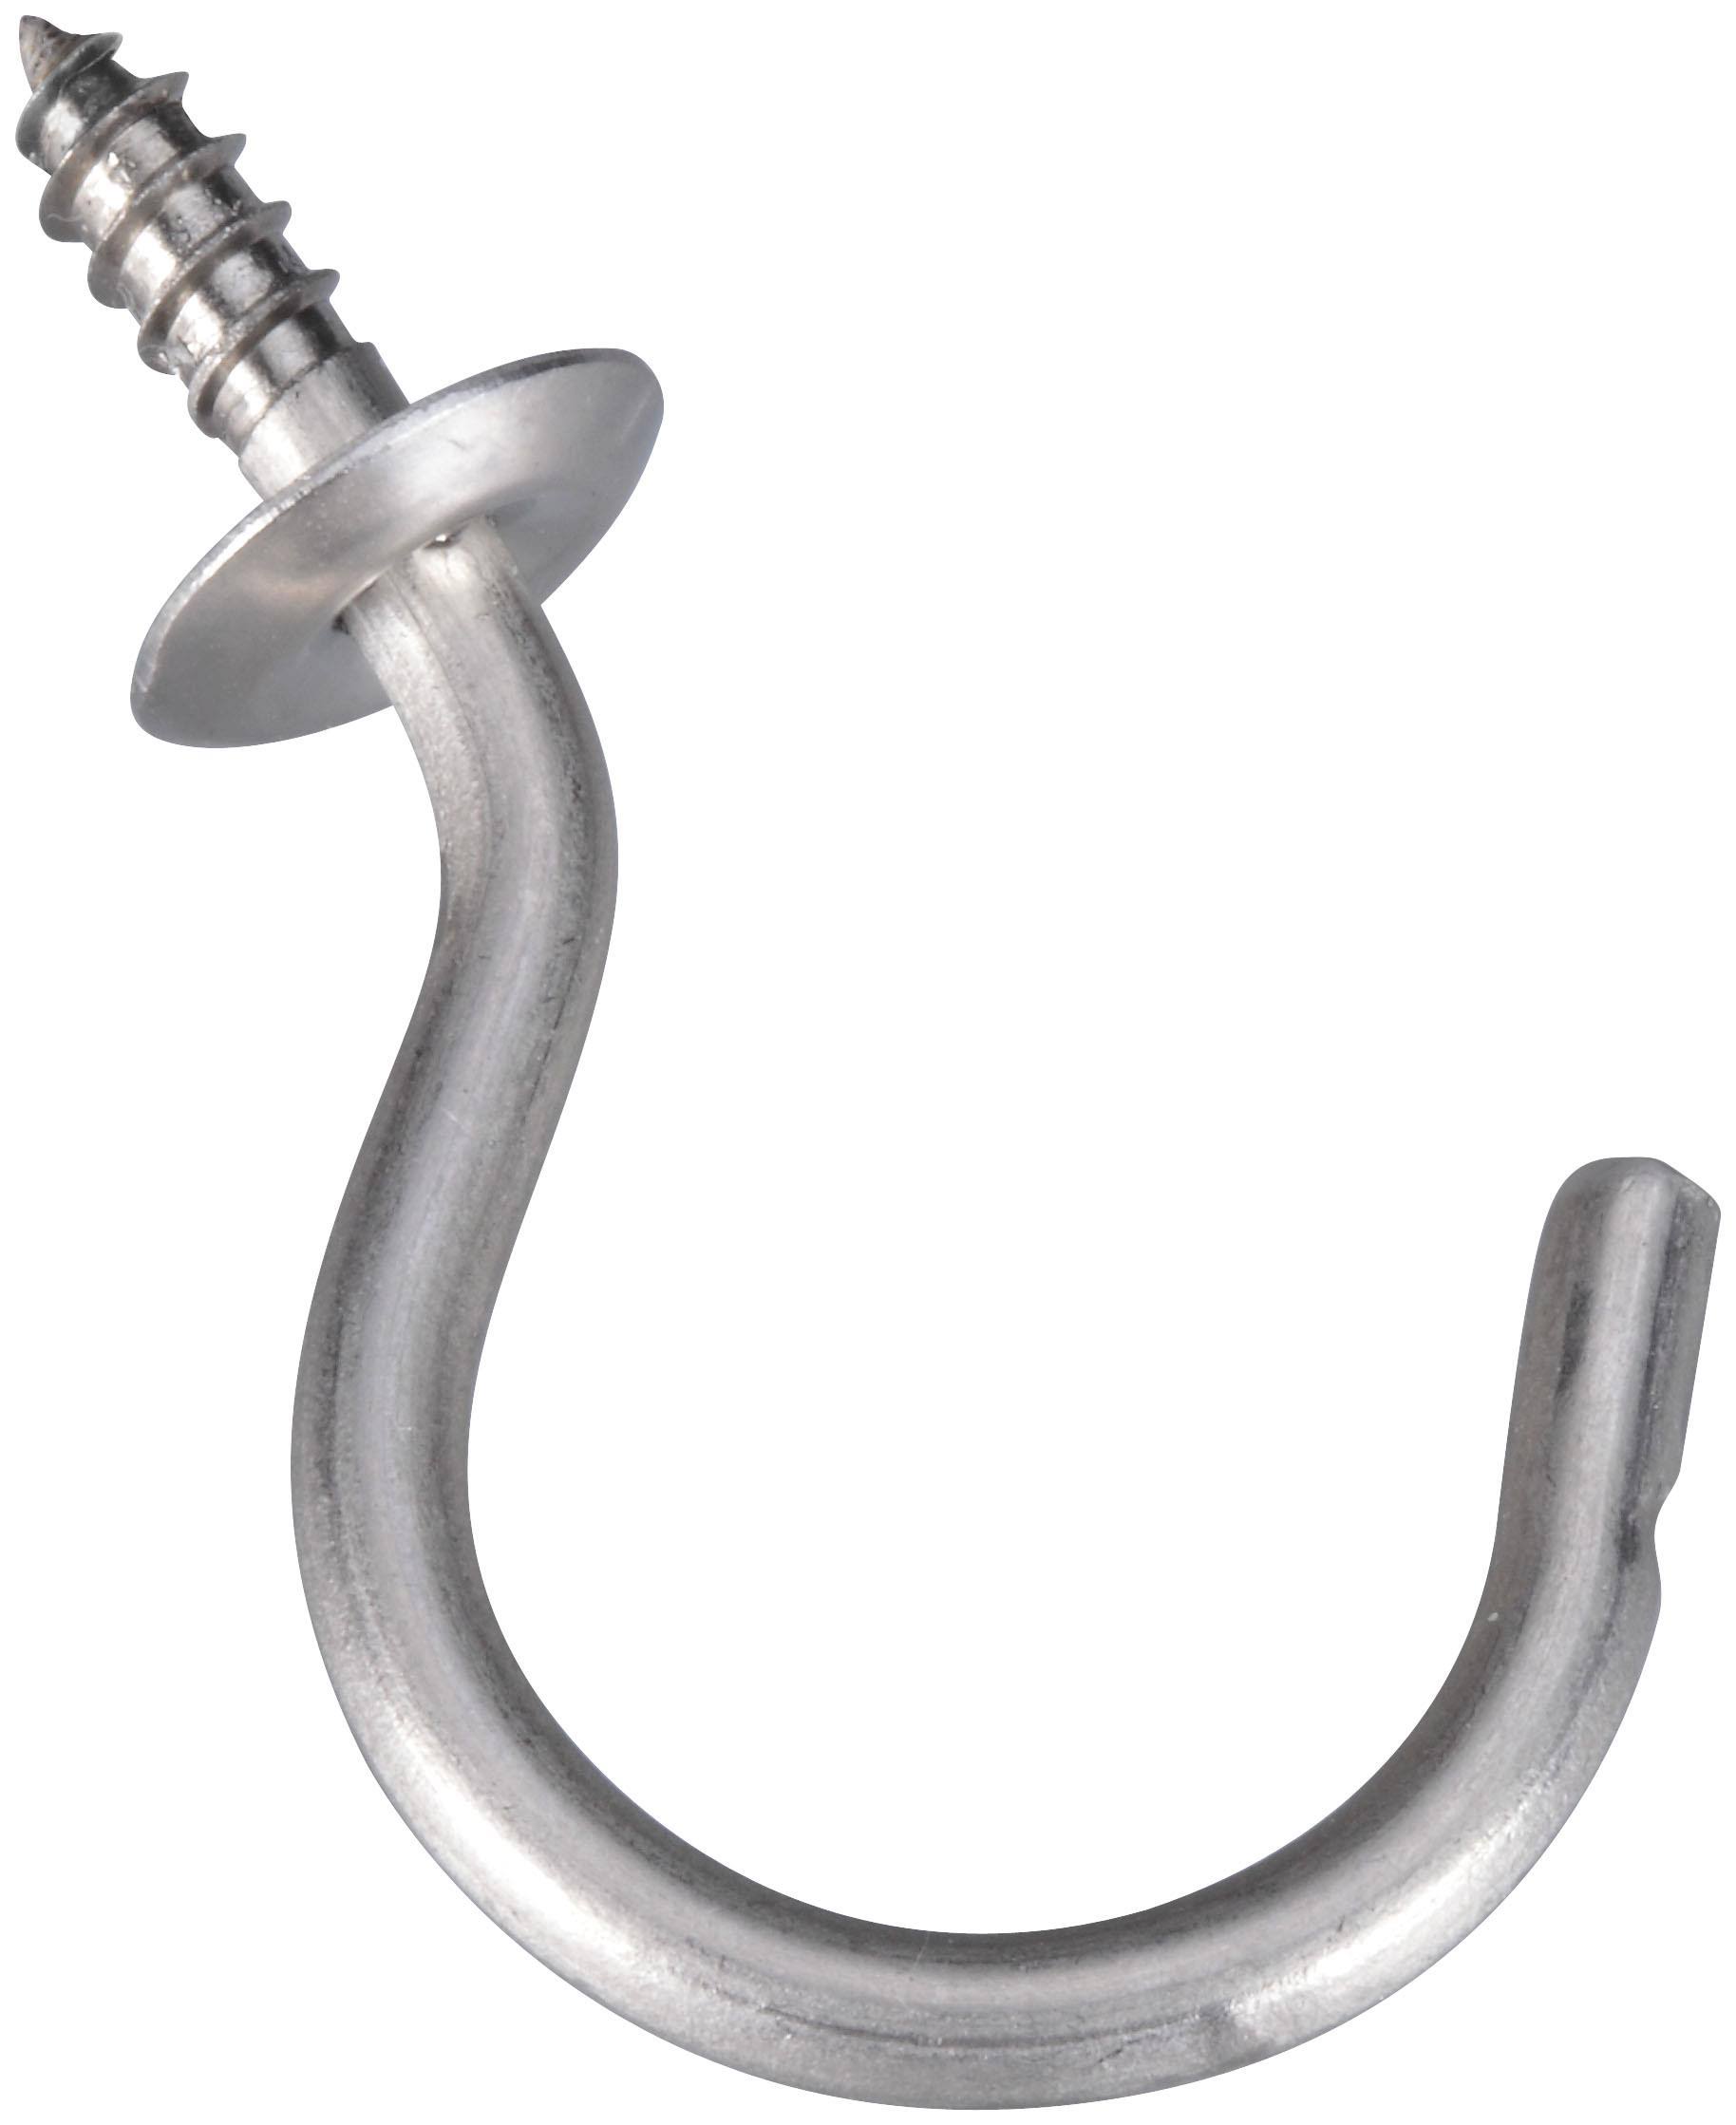 National Hardware Stainless Steel Cup Hook - 1 1/2"